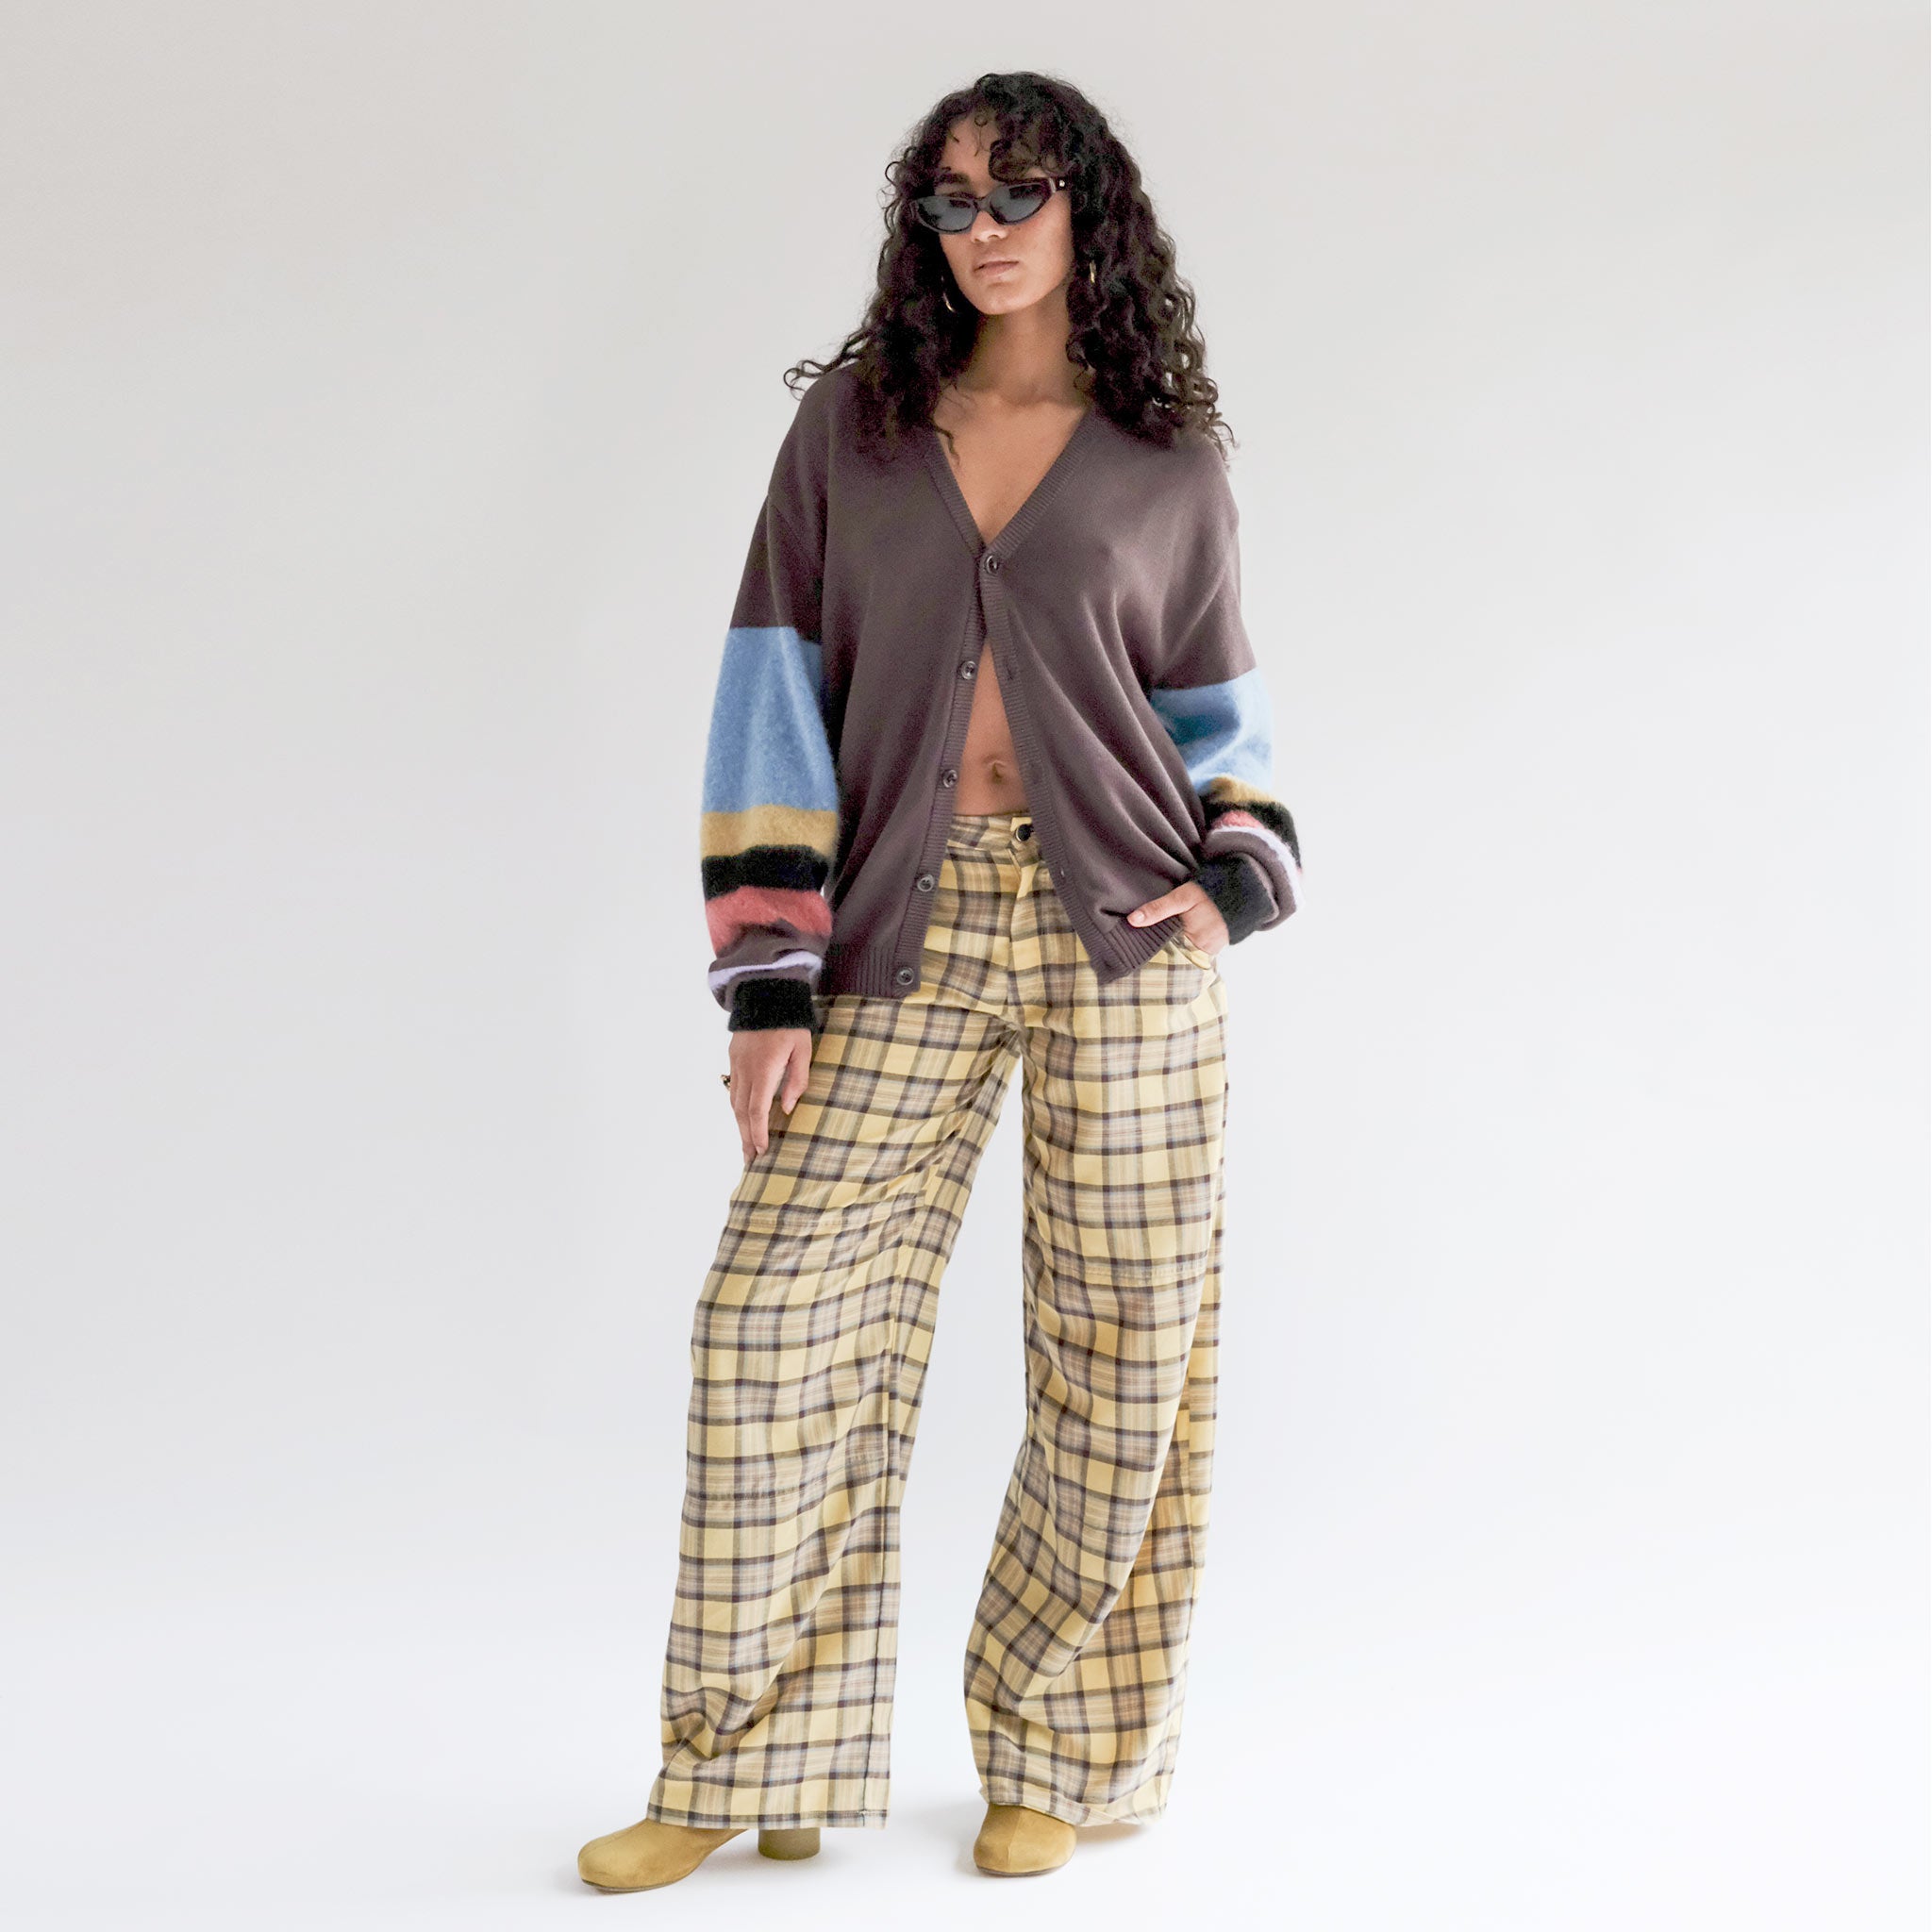 Full body photo of model wearing the Lawn Pant - Mall Plaid.